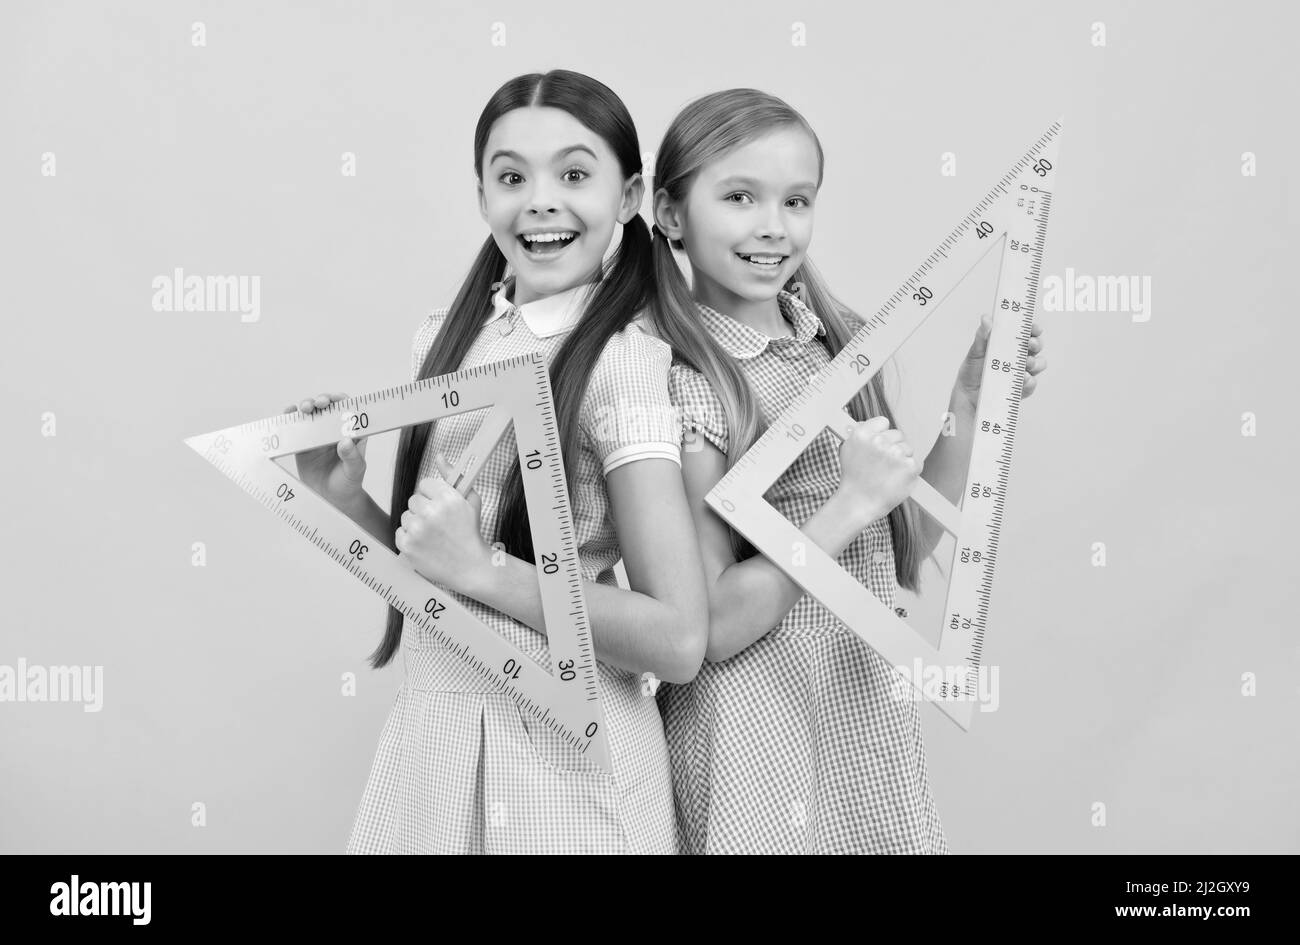 Education for all children. Happy teen girls hold triangular rulers. School education. Geometry lesson Stock Photo